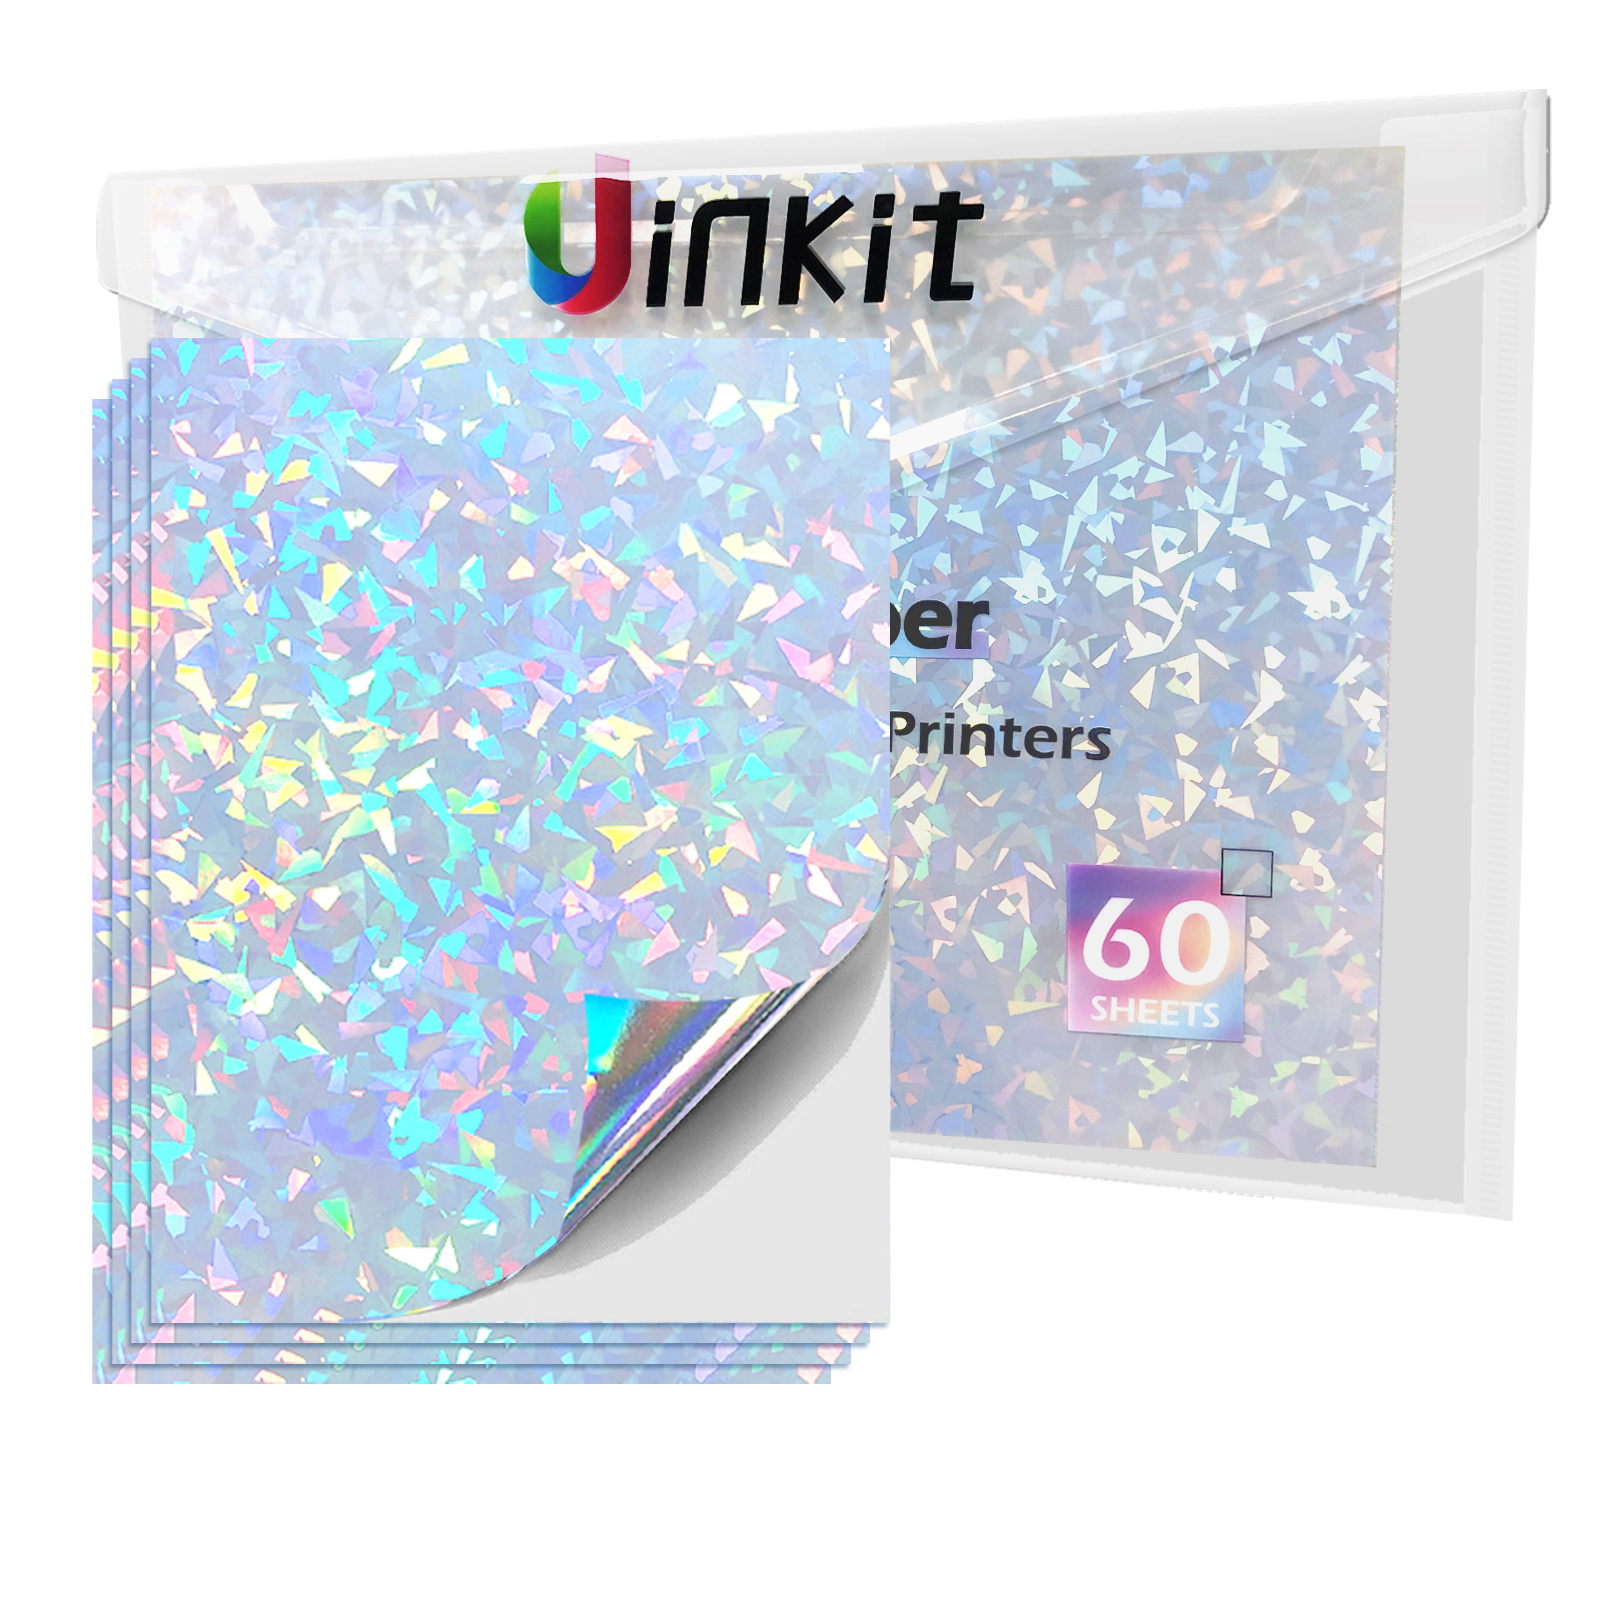 Unikit Holographic Sticker Page and so much more 